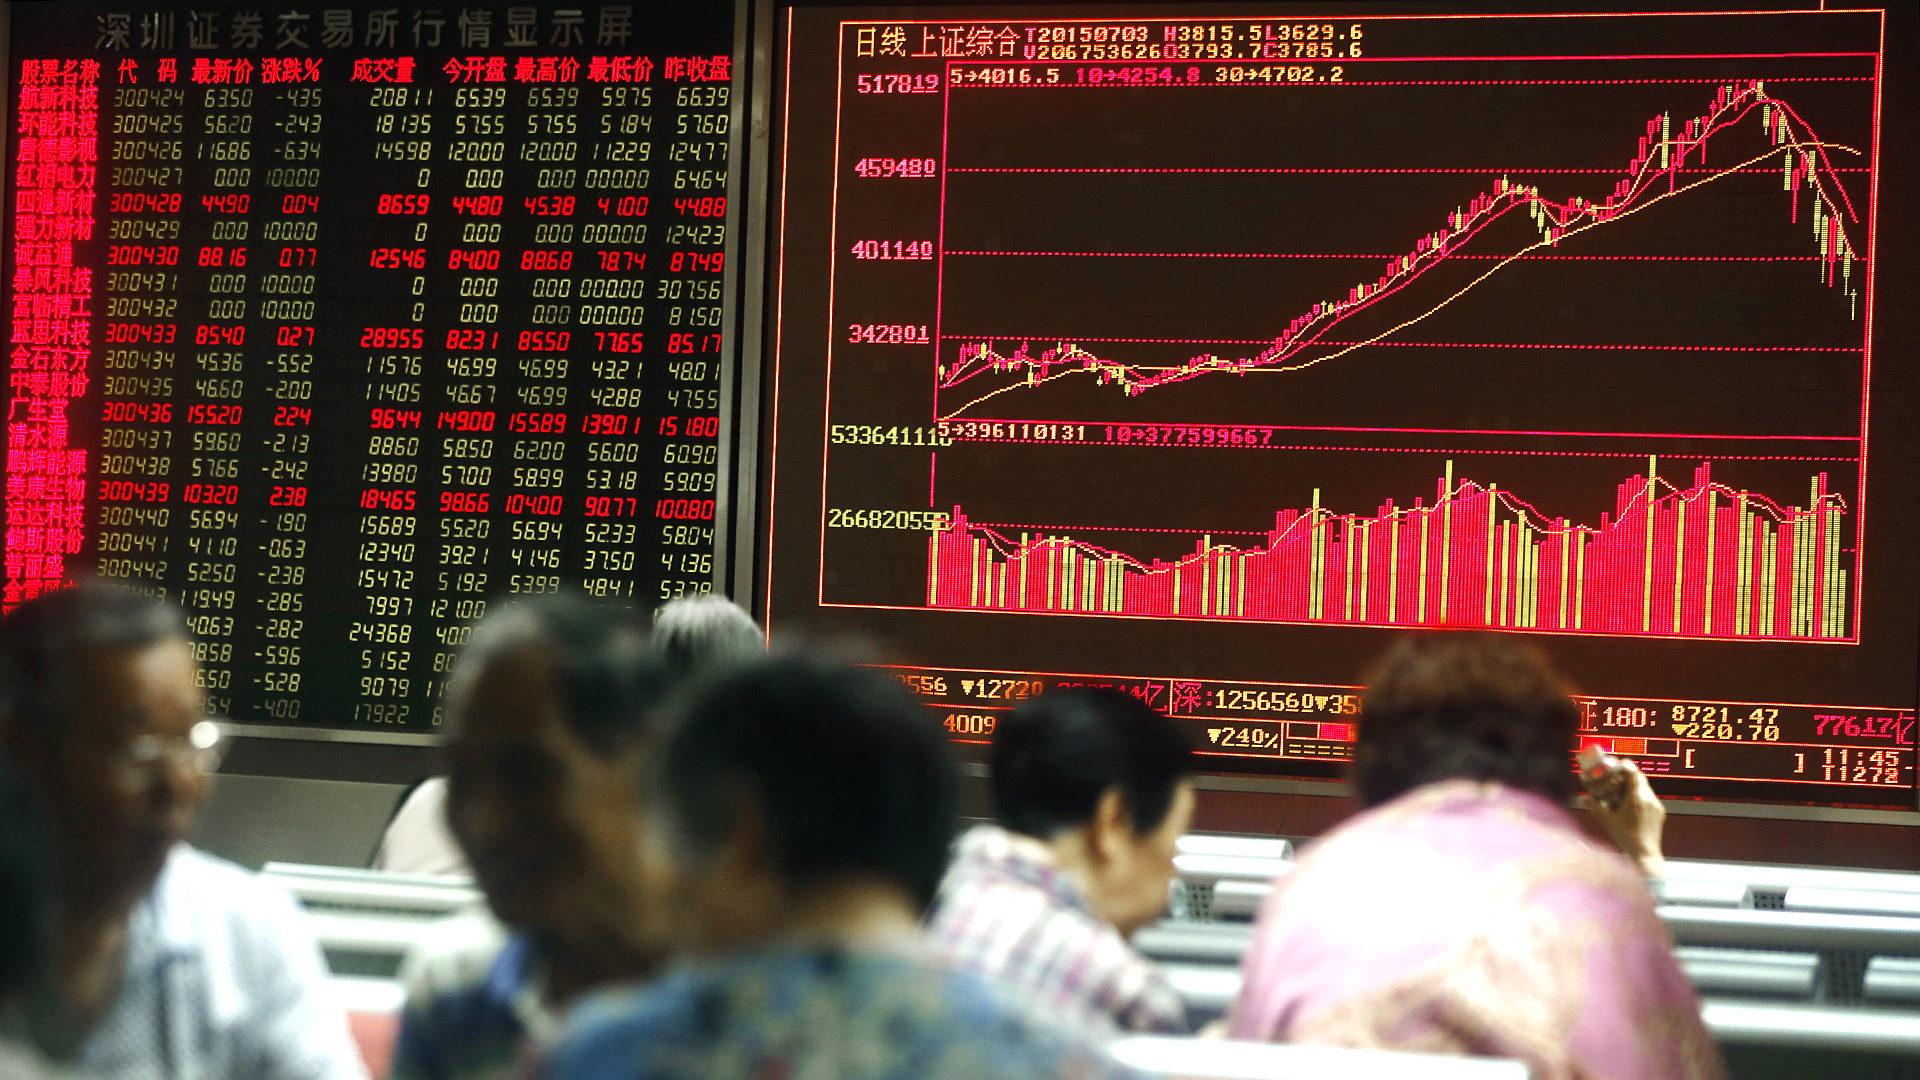 Chinese investors monitor stock prices in Shanghai, as shares opened lower on Friday in a rout from highs hit in the middle of June. Photo: EPA